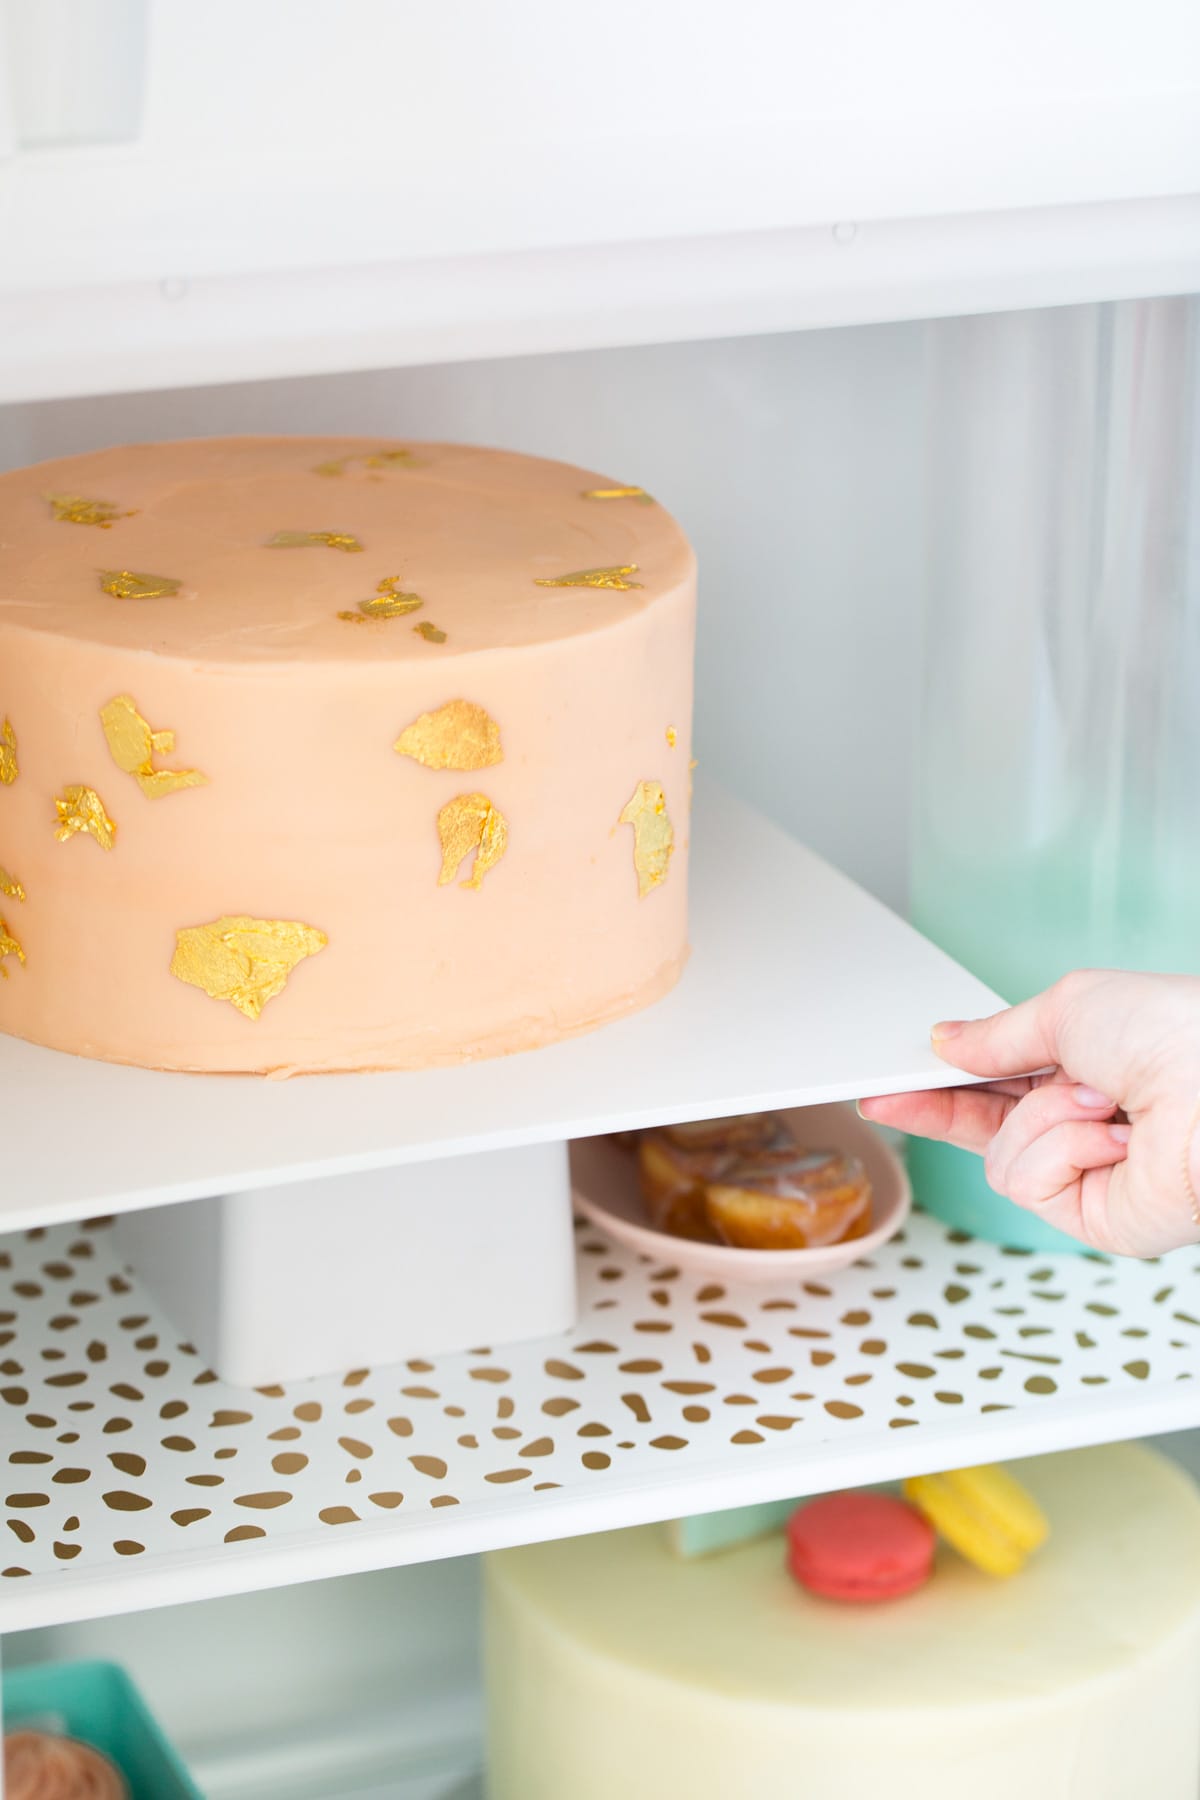 6 Oddly Satisfying Spring Refrigerator Cleaning Hacks by top Houston lifestyle Blogger Ashley Rose of Sugar & Cloth